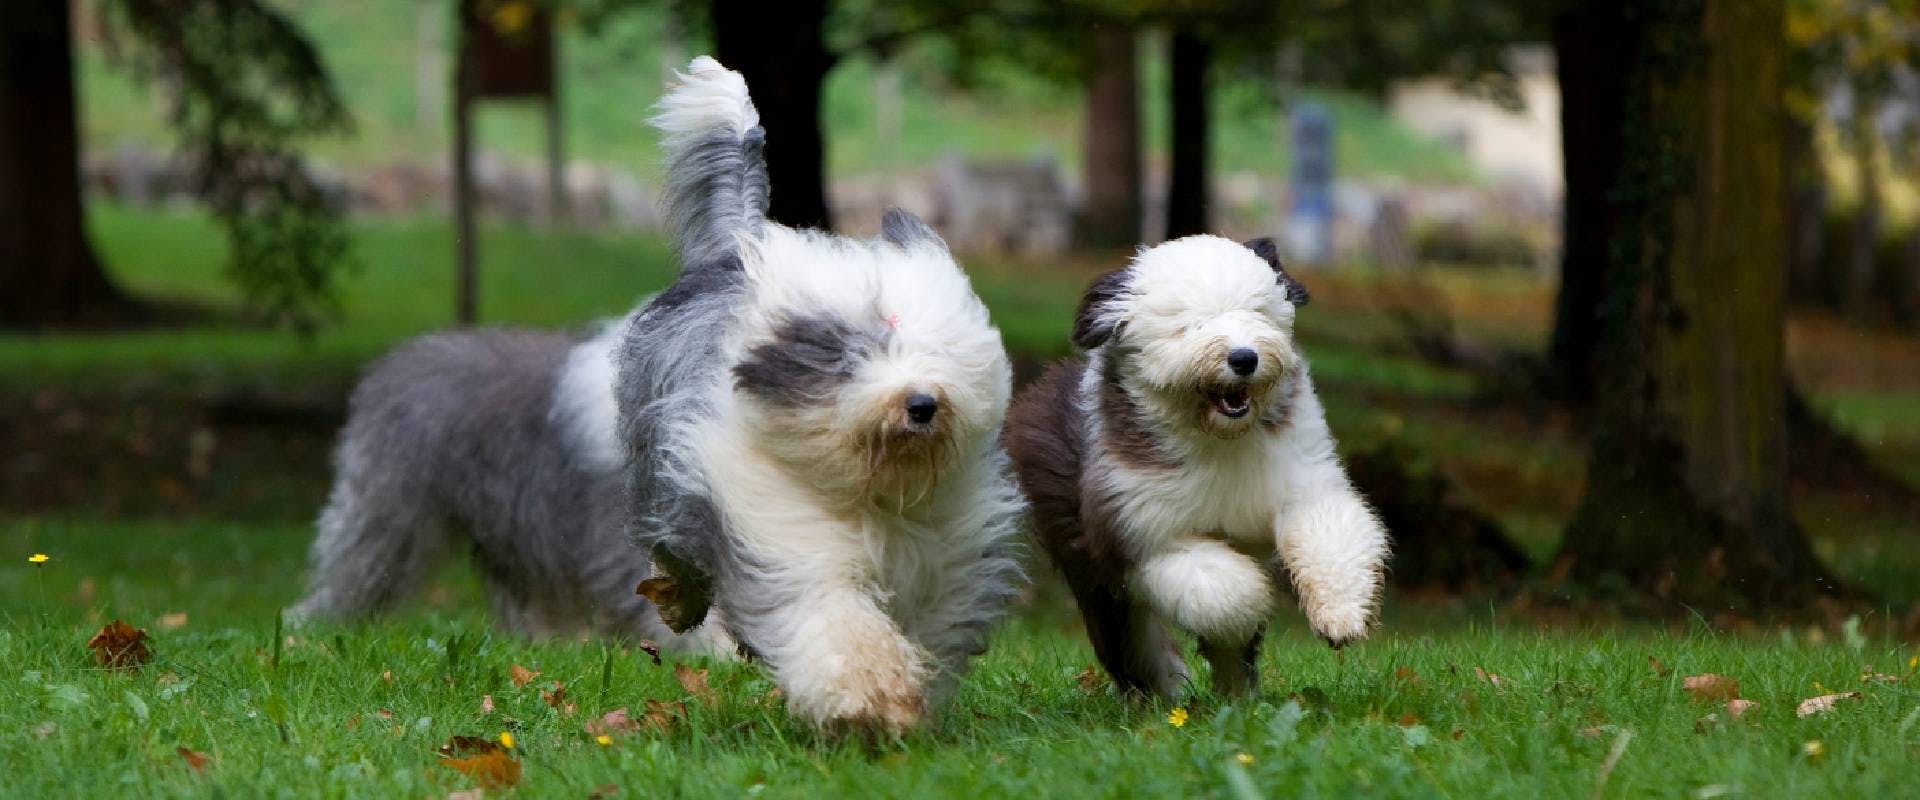 Two Old English Sheepdogs running in a field